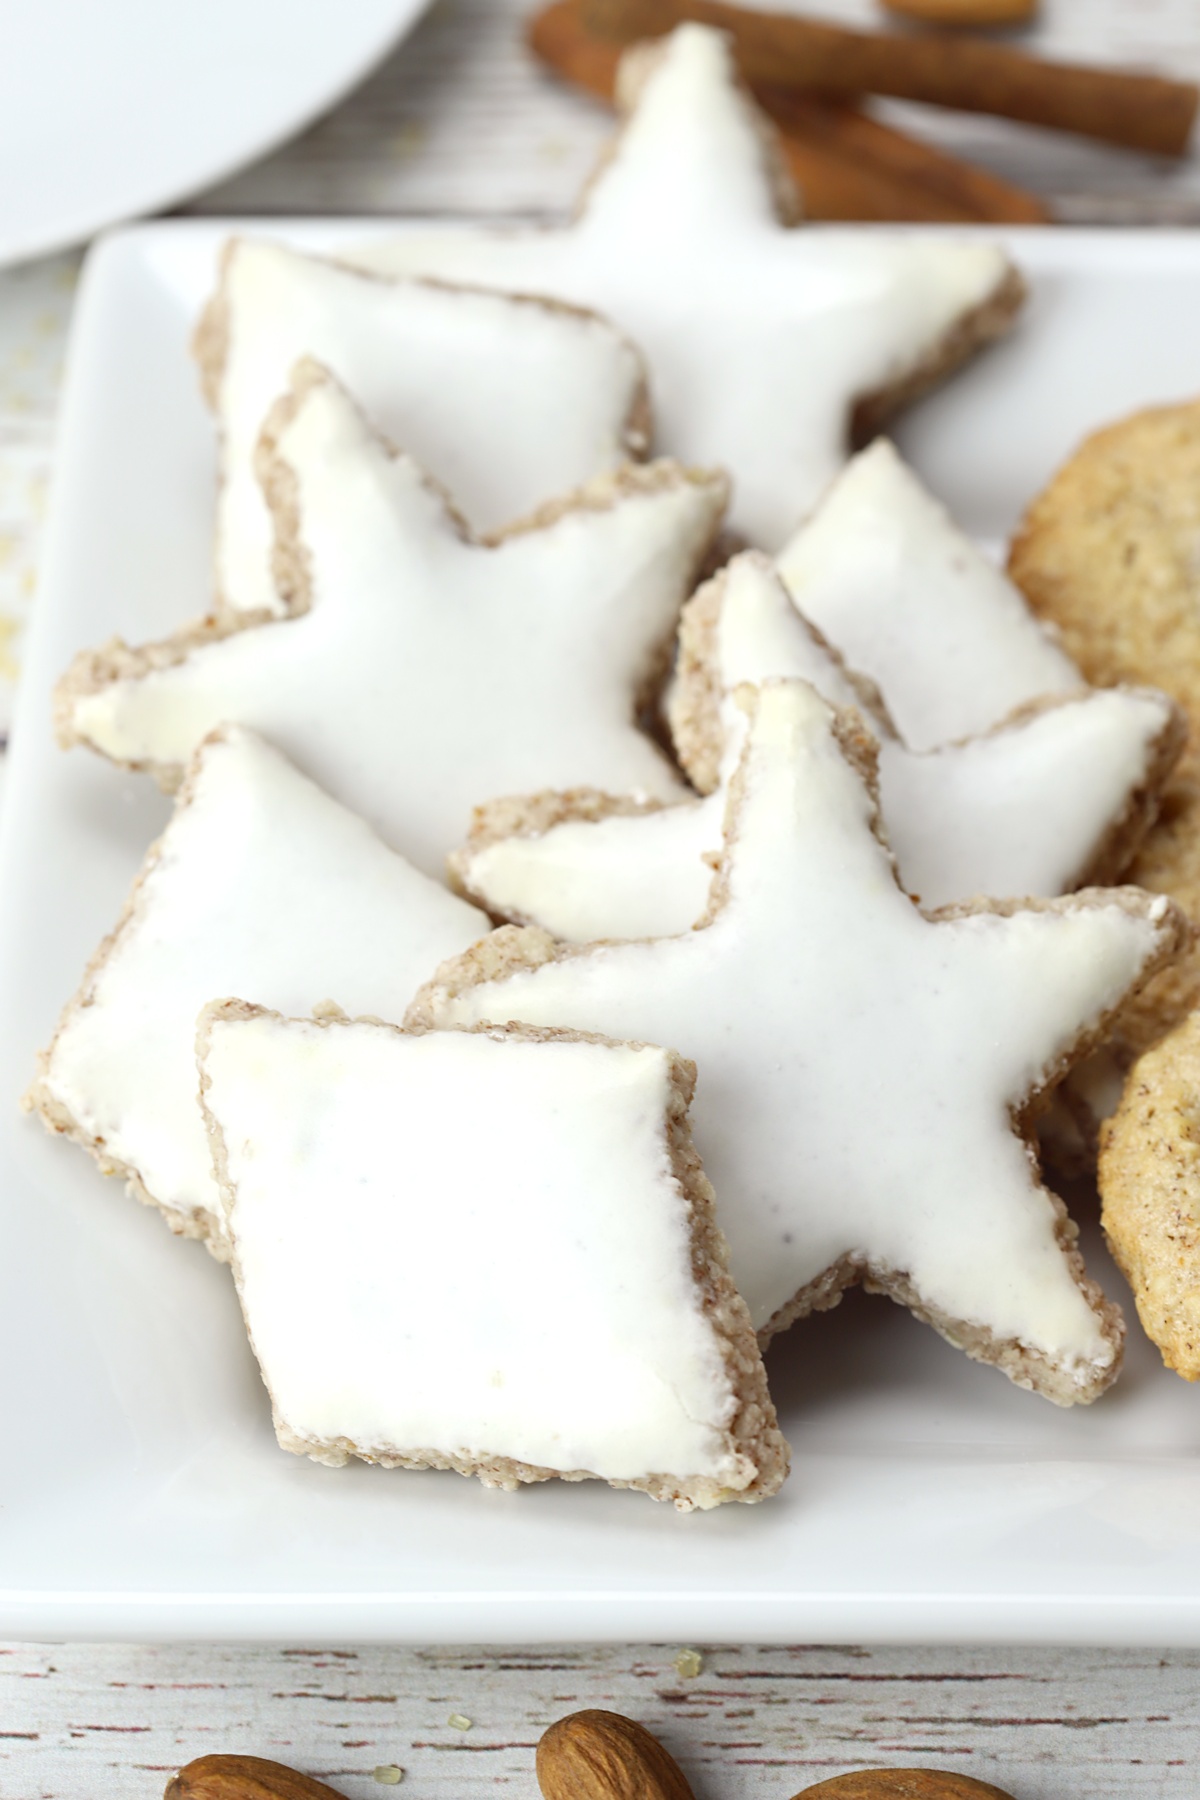 Zimtsterne star and diamond cookies on a serving plate.